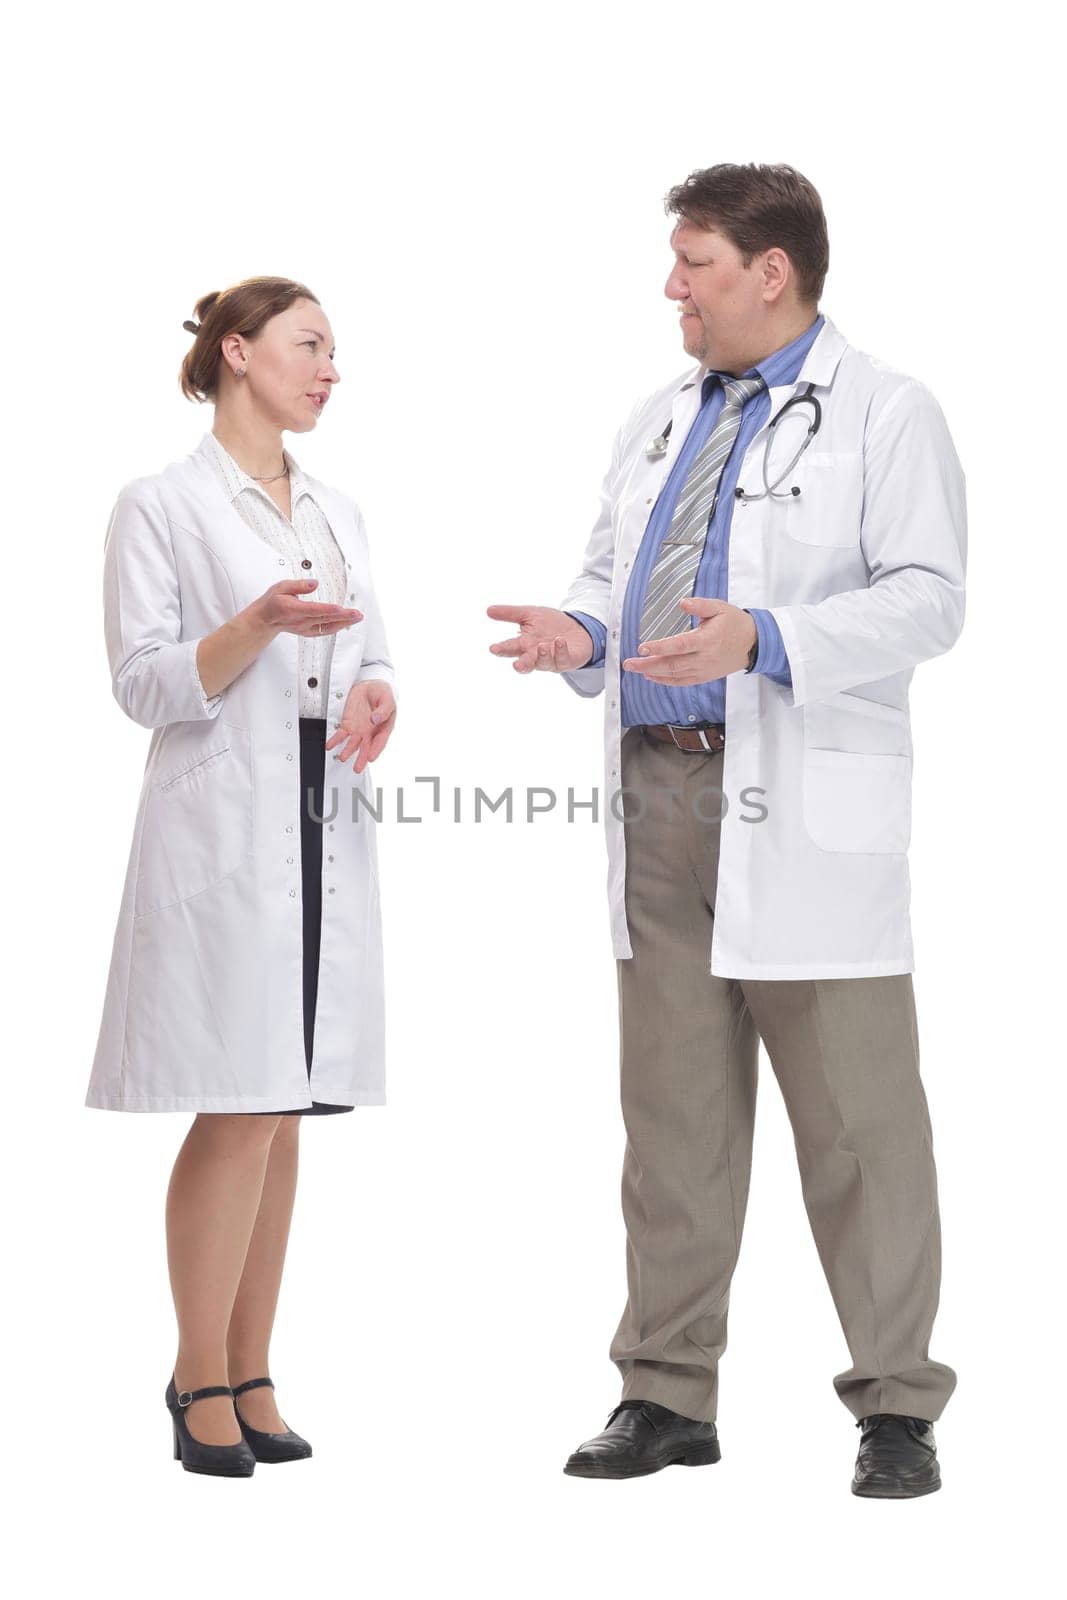 in full growth. medical colleagues standing together.isolated on a white background.